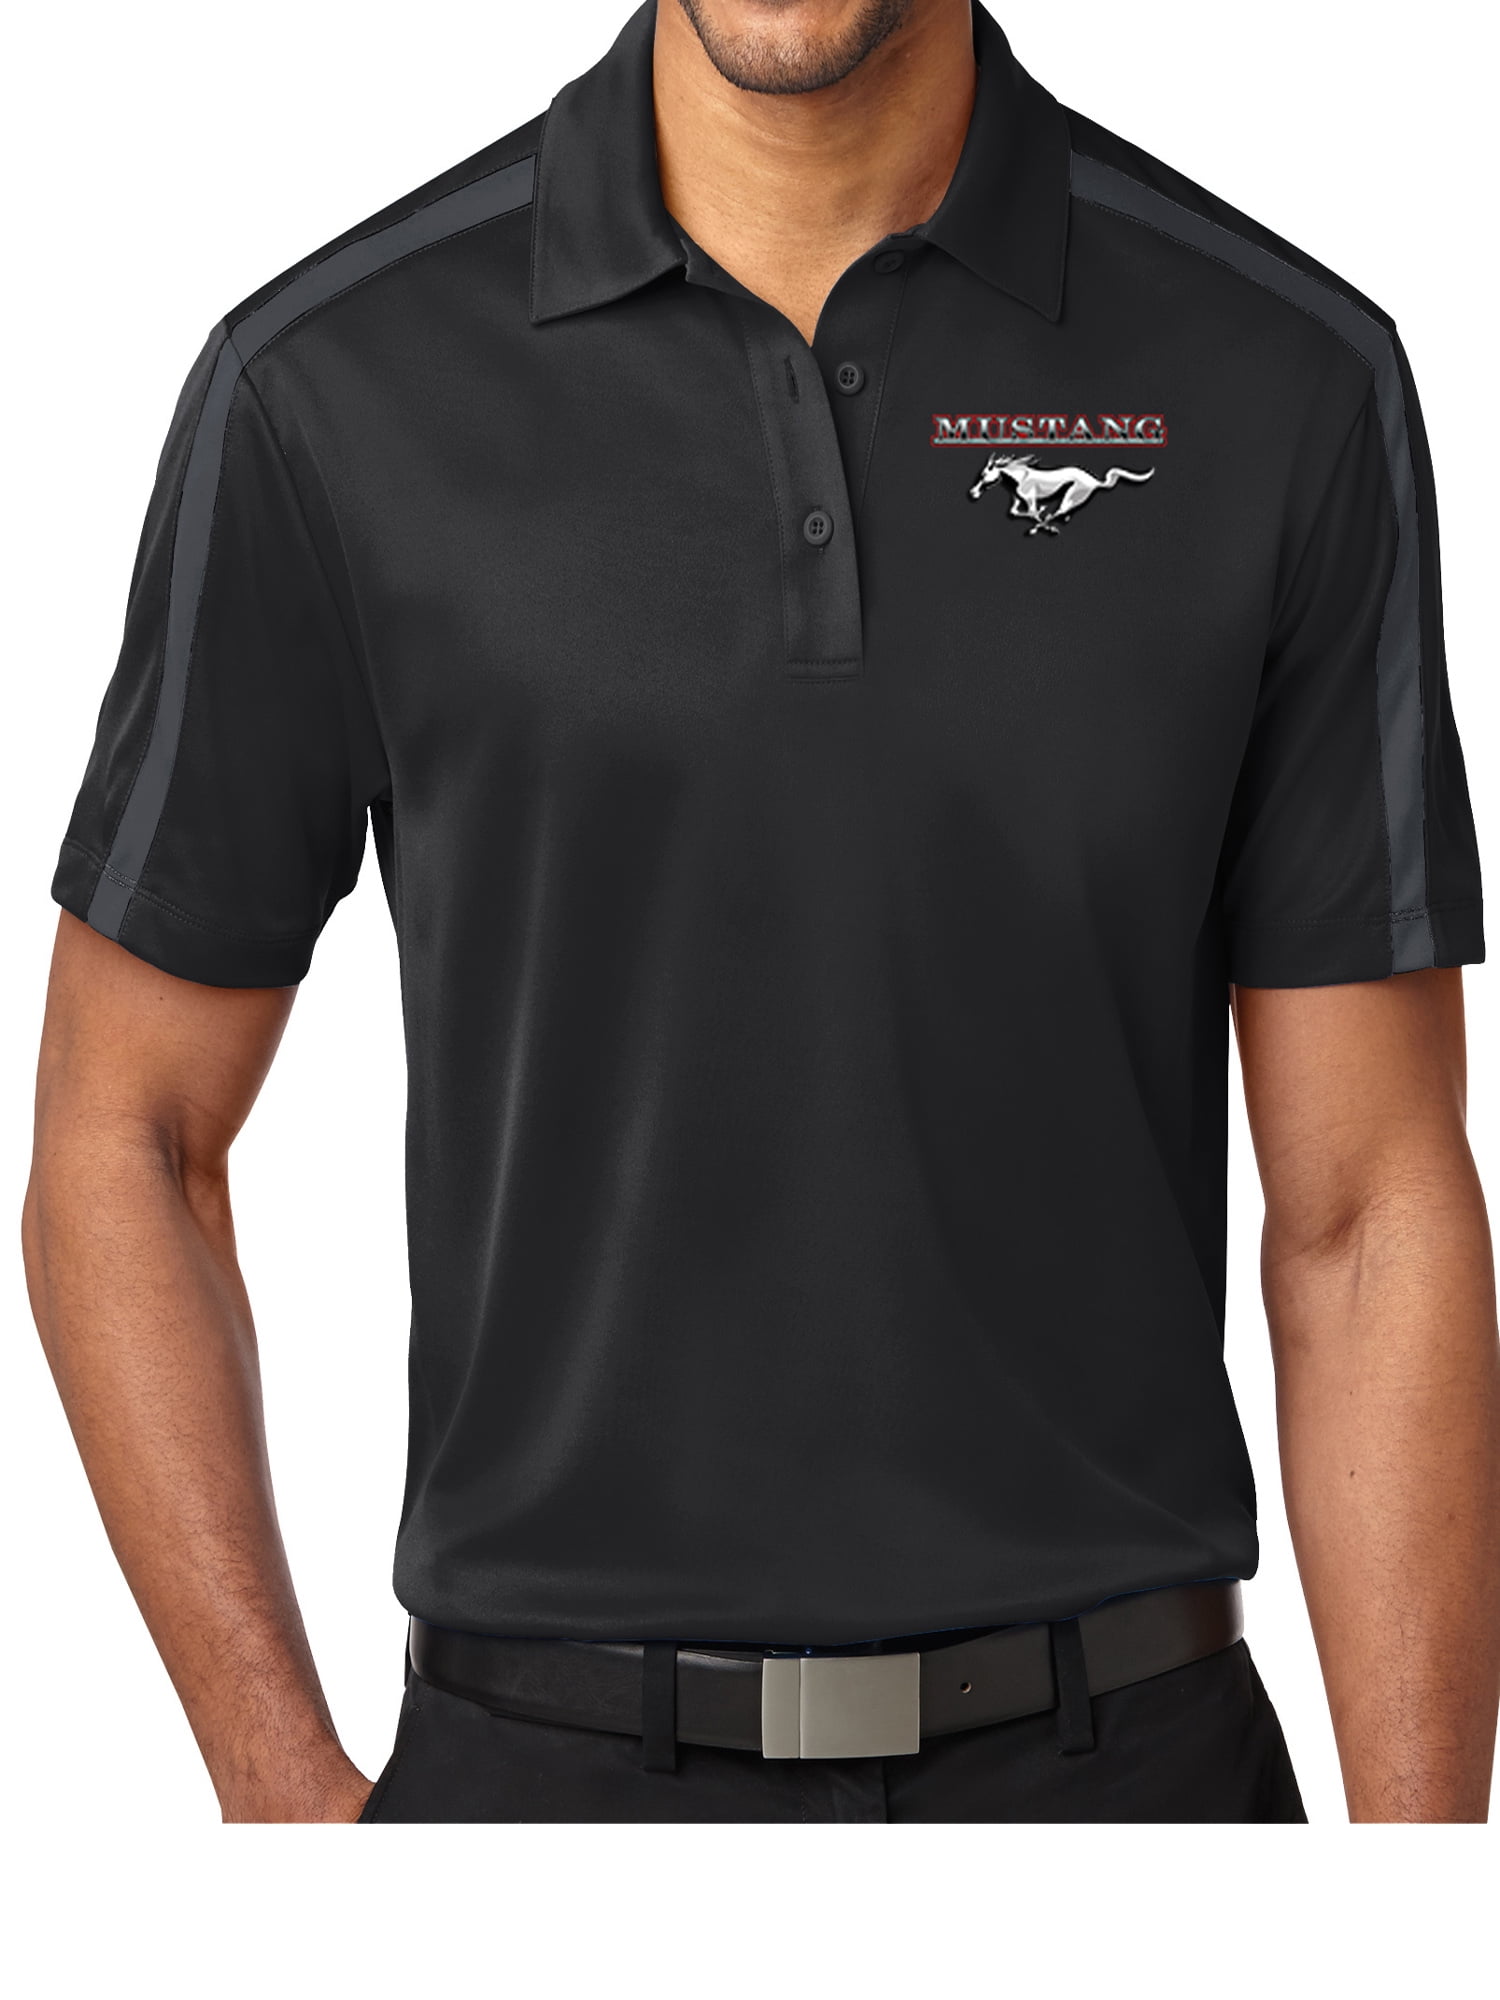 Ford Mustang Micro Mesh Colorblock Polo 50 Years Pocket Print